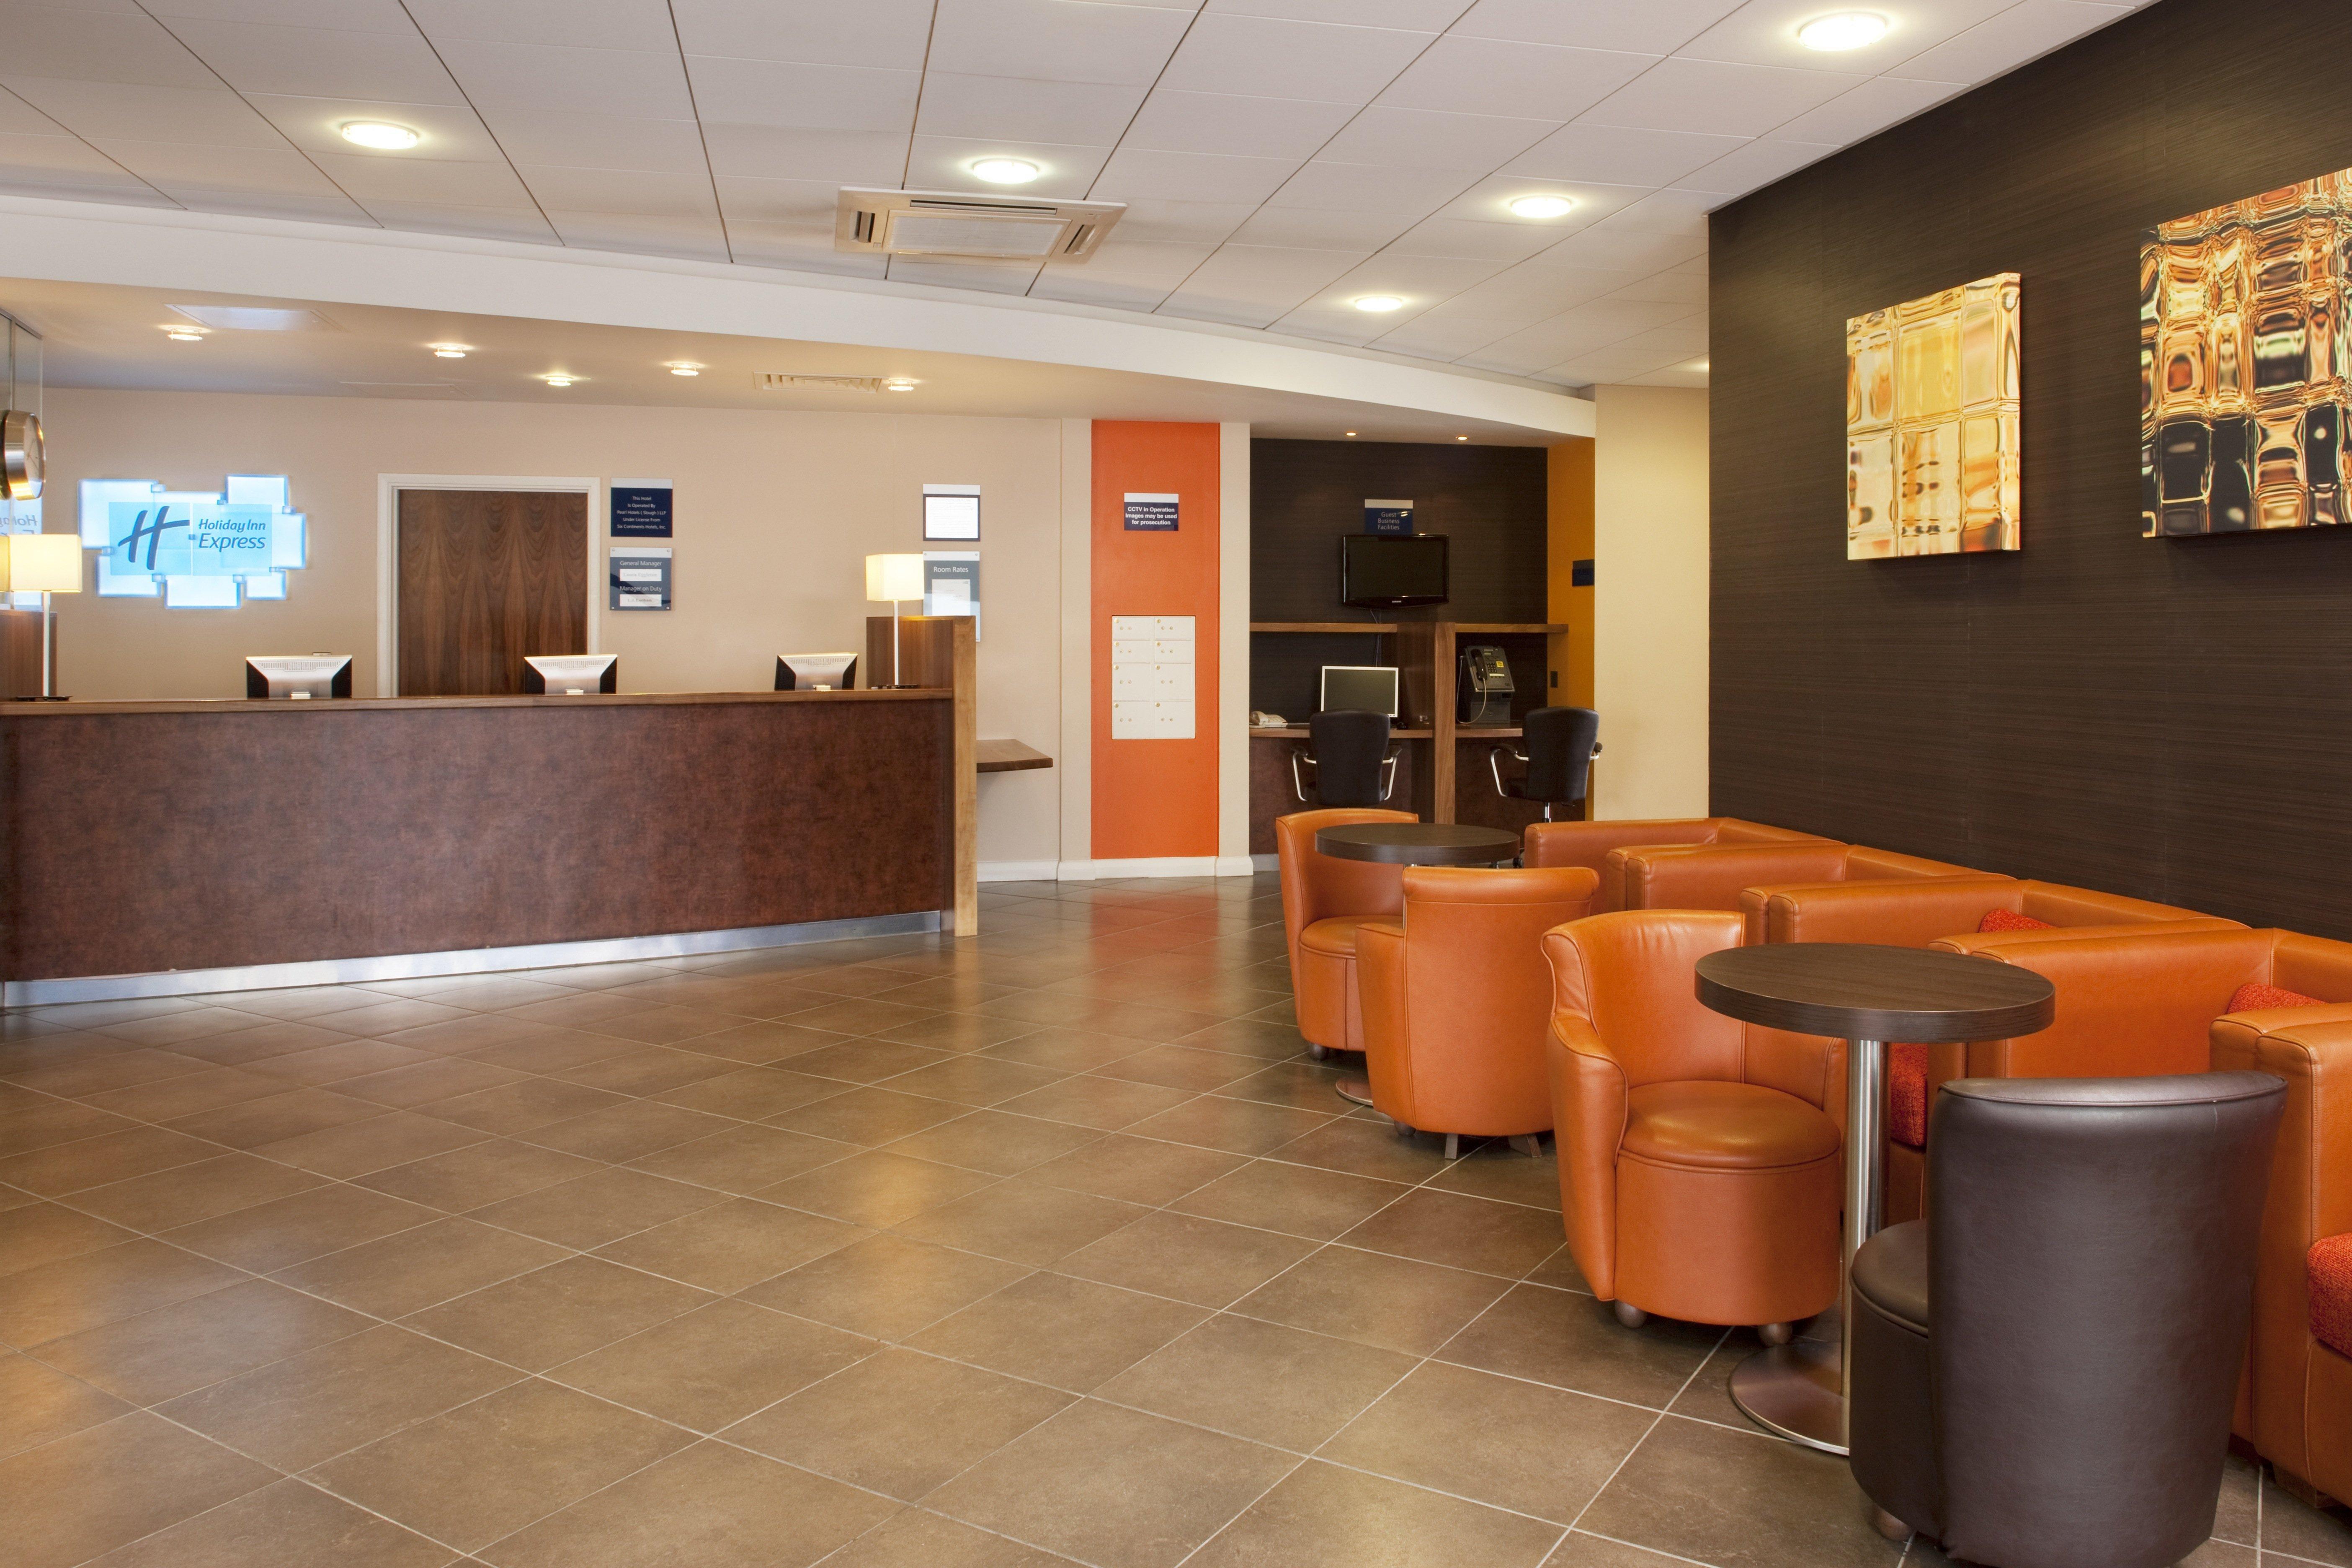 HOTEL HOLIDAY INN EXPRESS SLOUGH 3* (United Kingdom) - from £ 47 | HOTELMIX